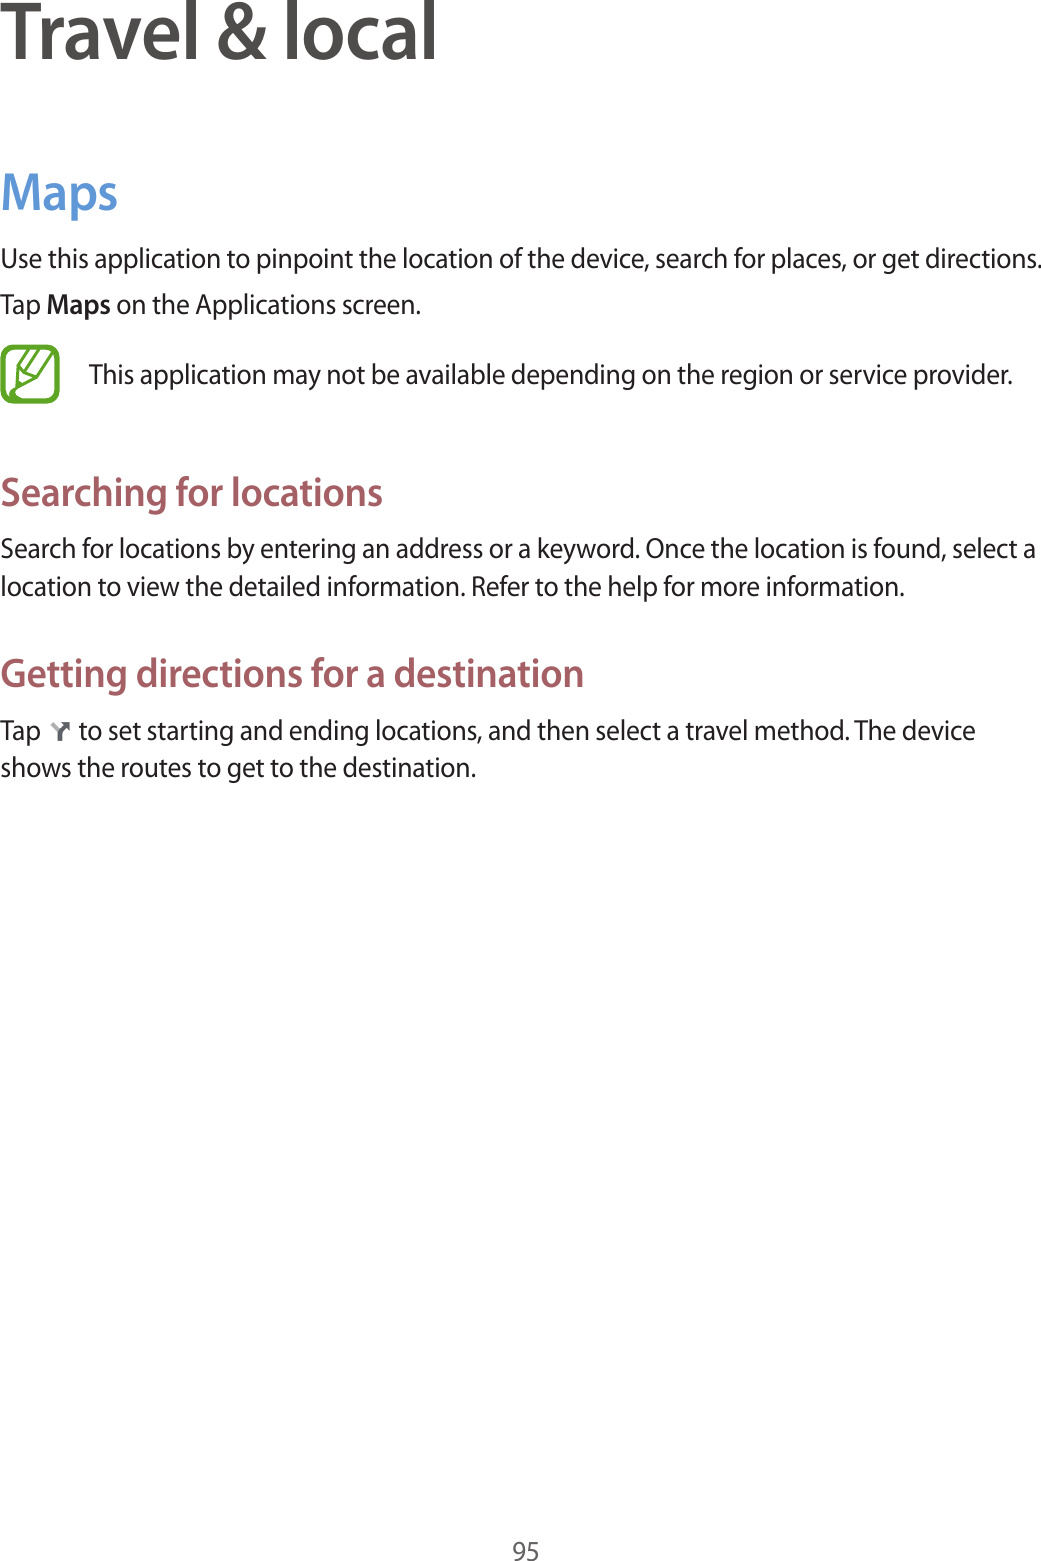 95Travel &amp; localMapsUse this application to pinpoint the location of the device, search for places, or get directions.Tap Maps on the Applications screen.This application may not be available depending on the region or service provider.Searching for locationsSearch for locations by entering an address or a keyword. Once the location is found, select a location to view the detailed information. Refer to the help for more information.Getting directions for a destinationTap   to set starting and ending locations, and then select a travel method. The device shows the routes to get to the destination.